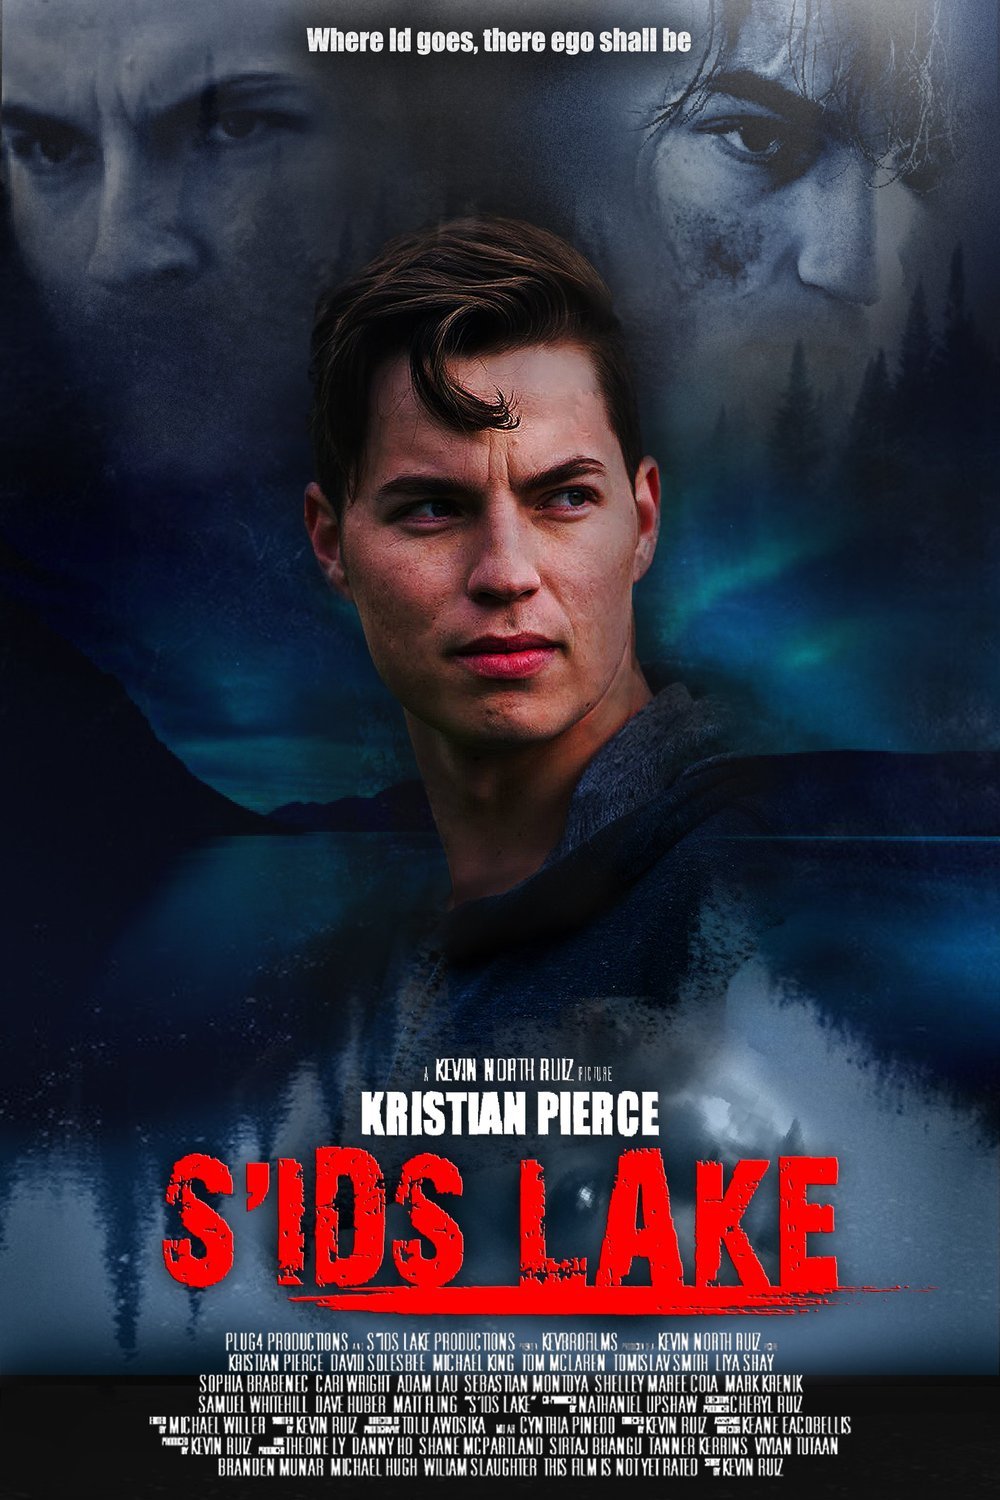 Poster of the movie S'ids Lake